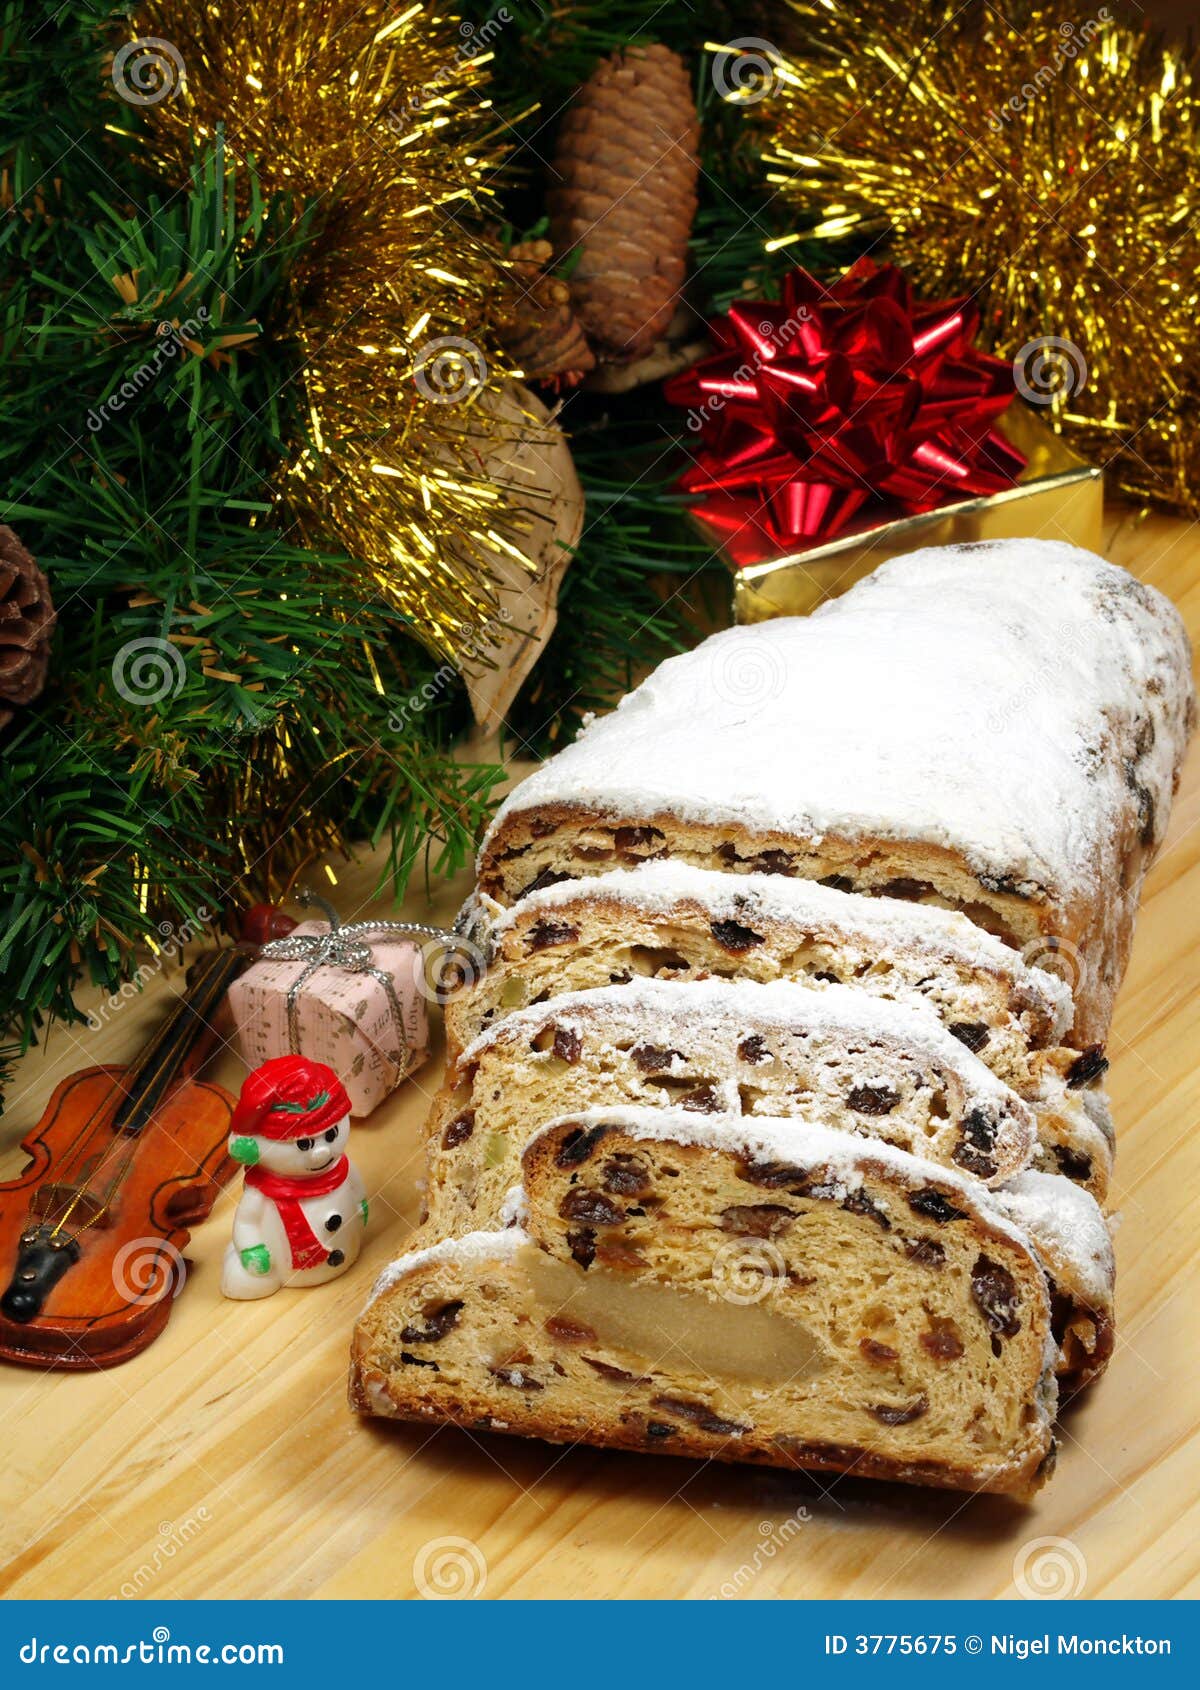 Traditional Christmas Stollen Stock Image - Image of raisins, icing ...